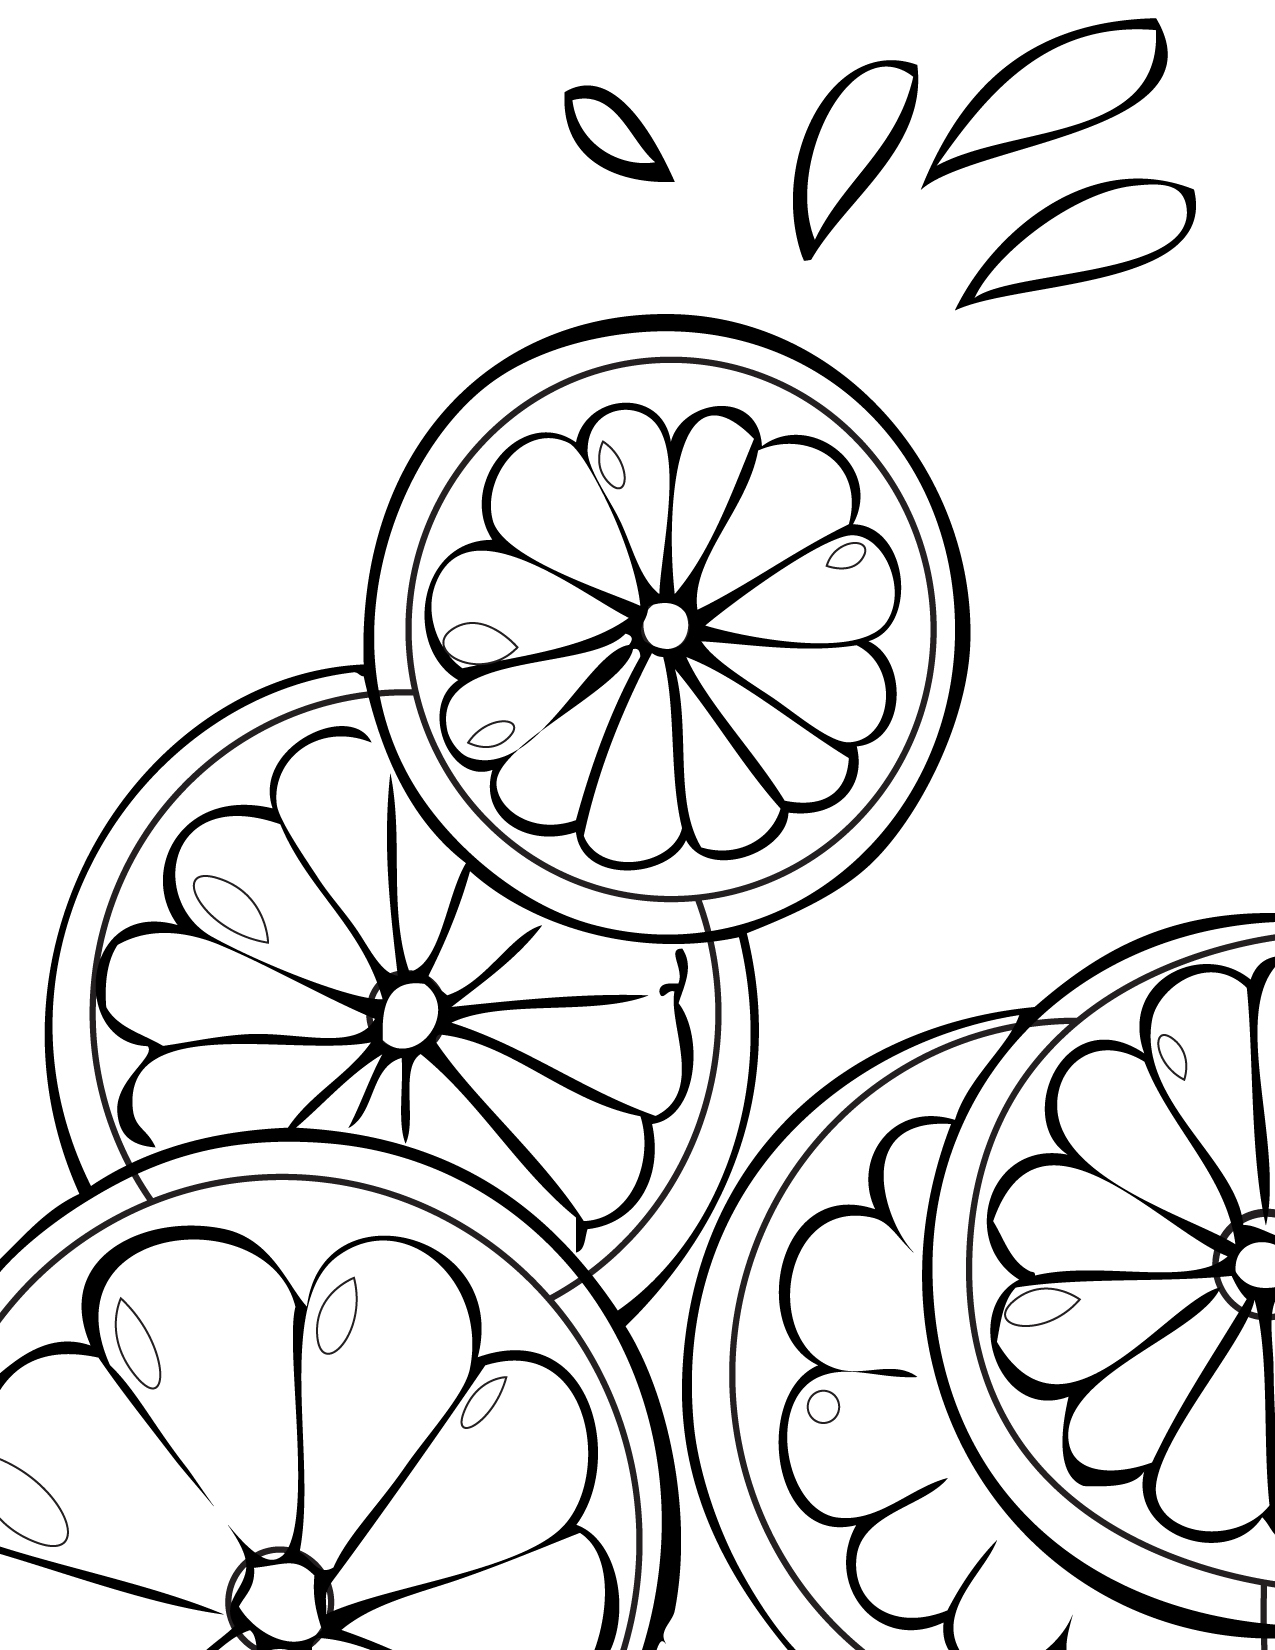 Free Printable Food Fruits Coloring Page for Adults and Kids